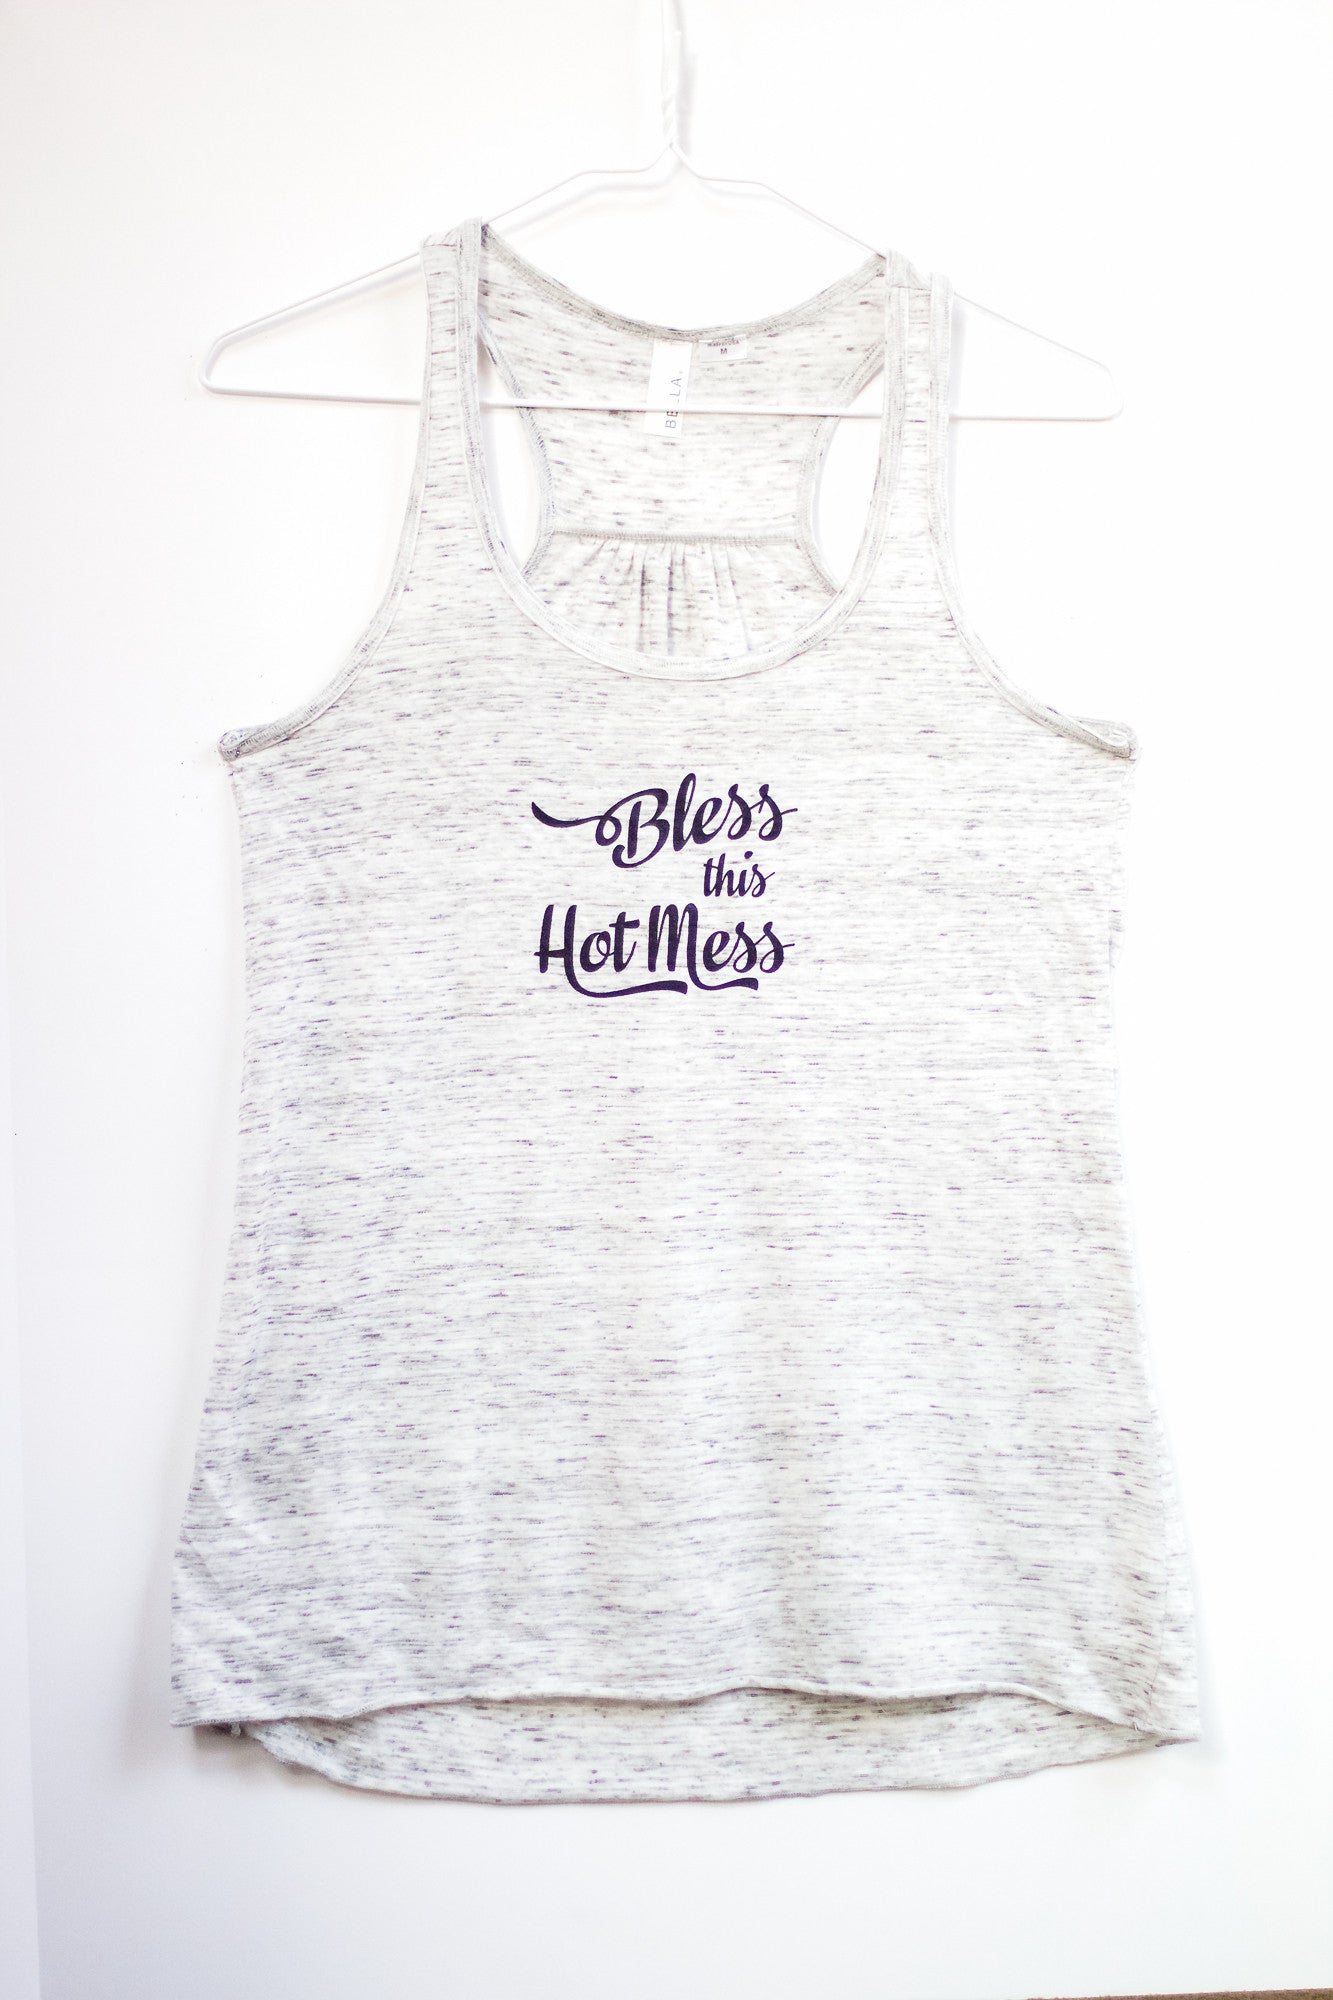 Bless This Hot Mess tank